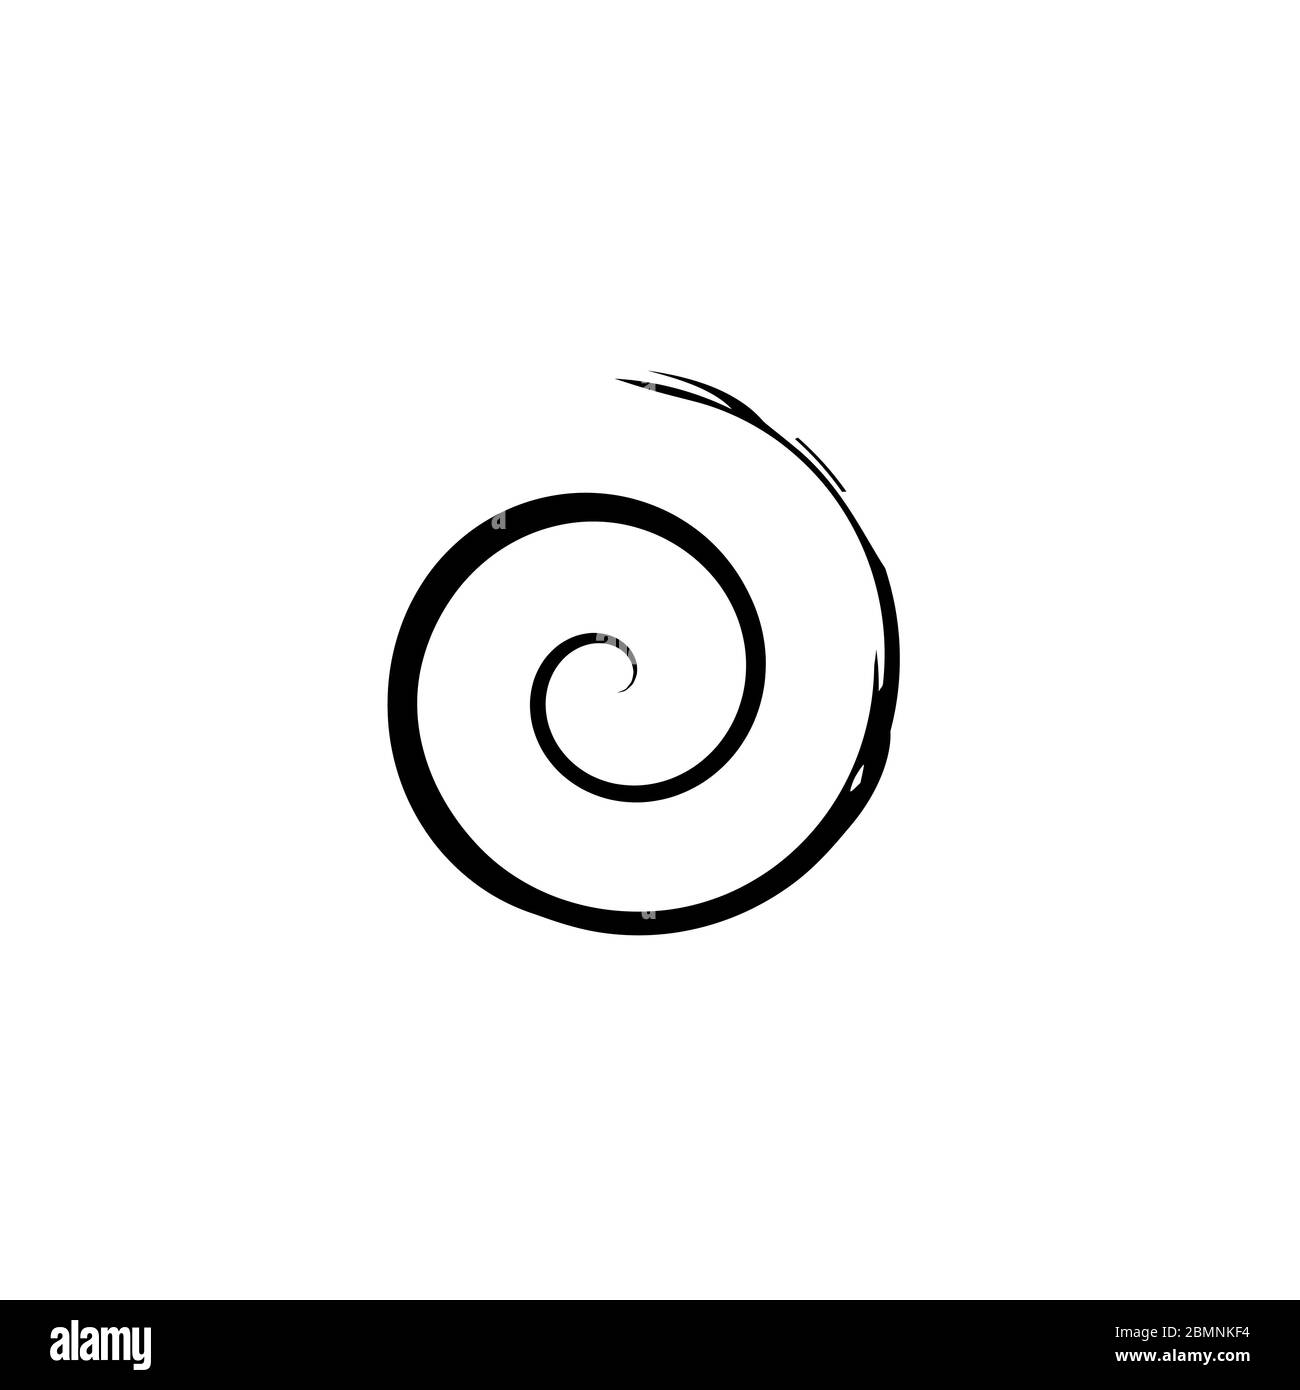 Spiral twirl Shape Cycle Creative Symbol. Wave Icon. Spiral Brush Stroke Element. Round Shape. Stock Vector illustration isolated on white background. Stock Vector